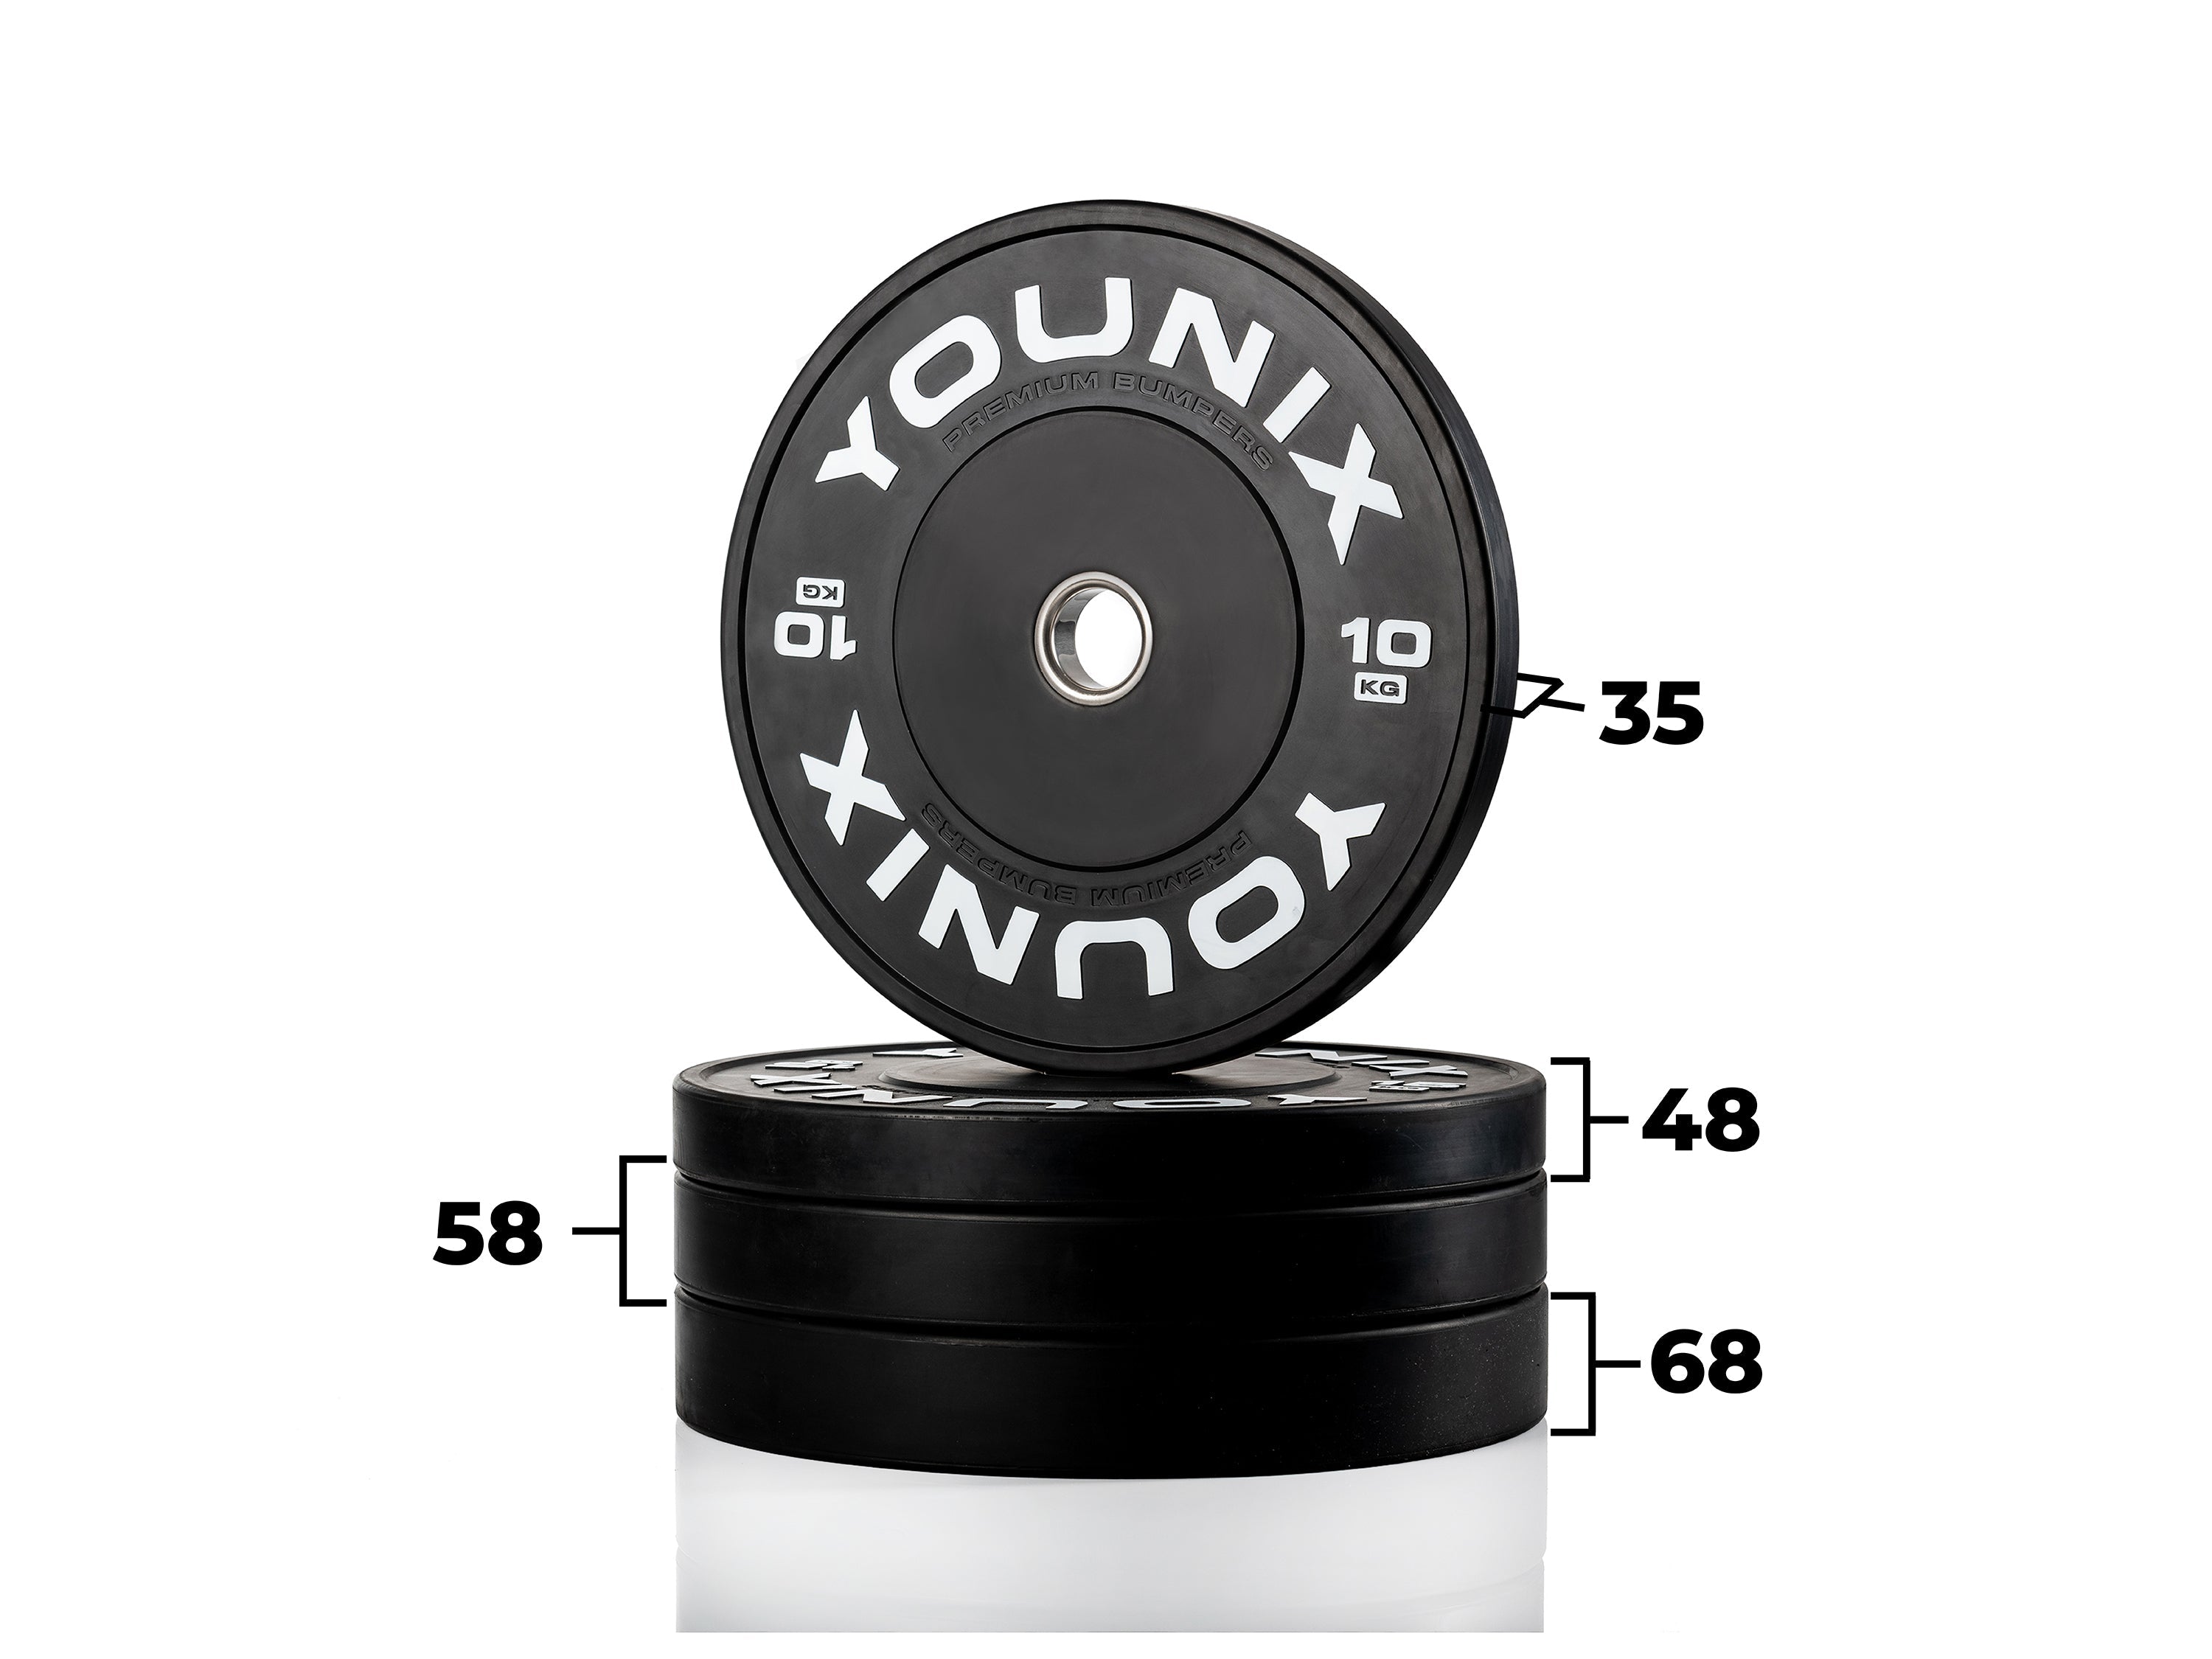 Younix Competition Bumper plates